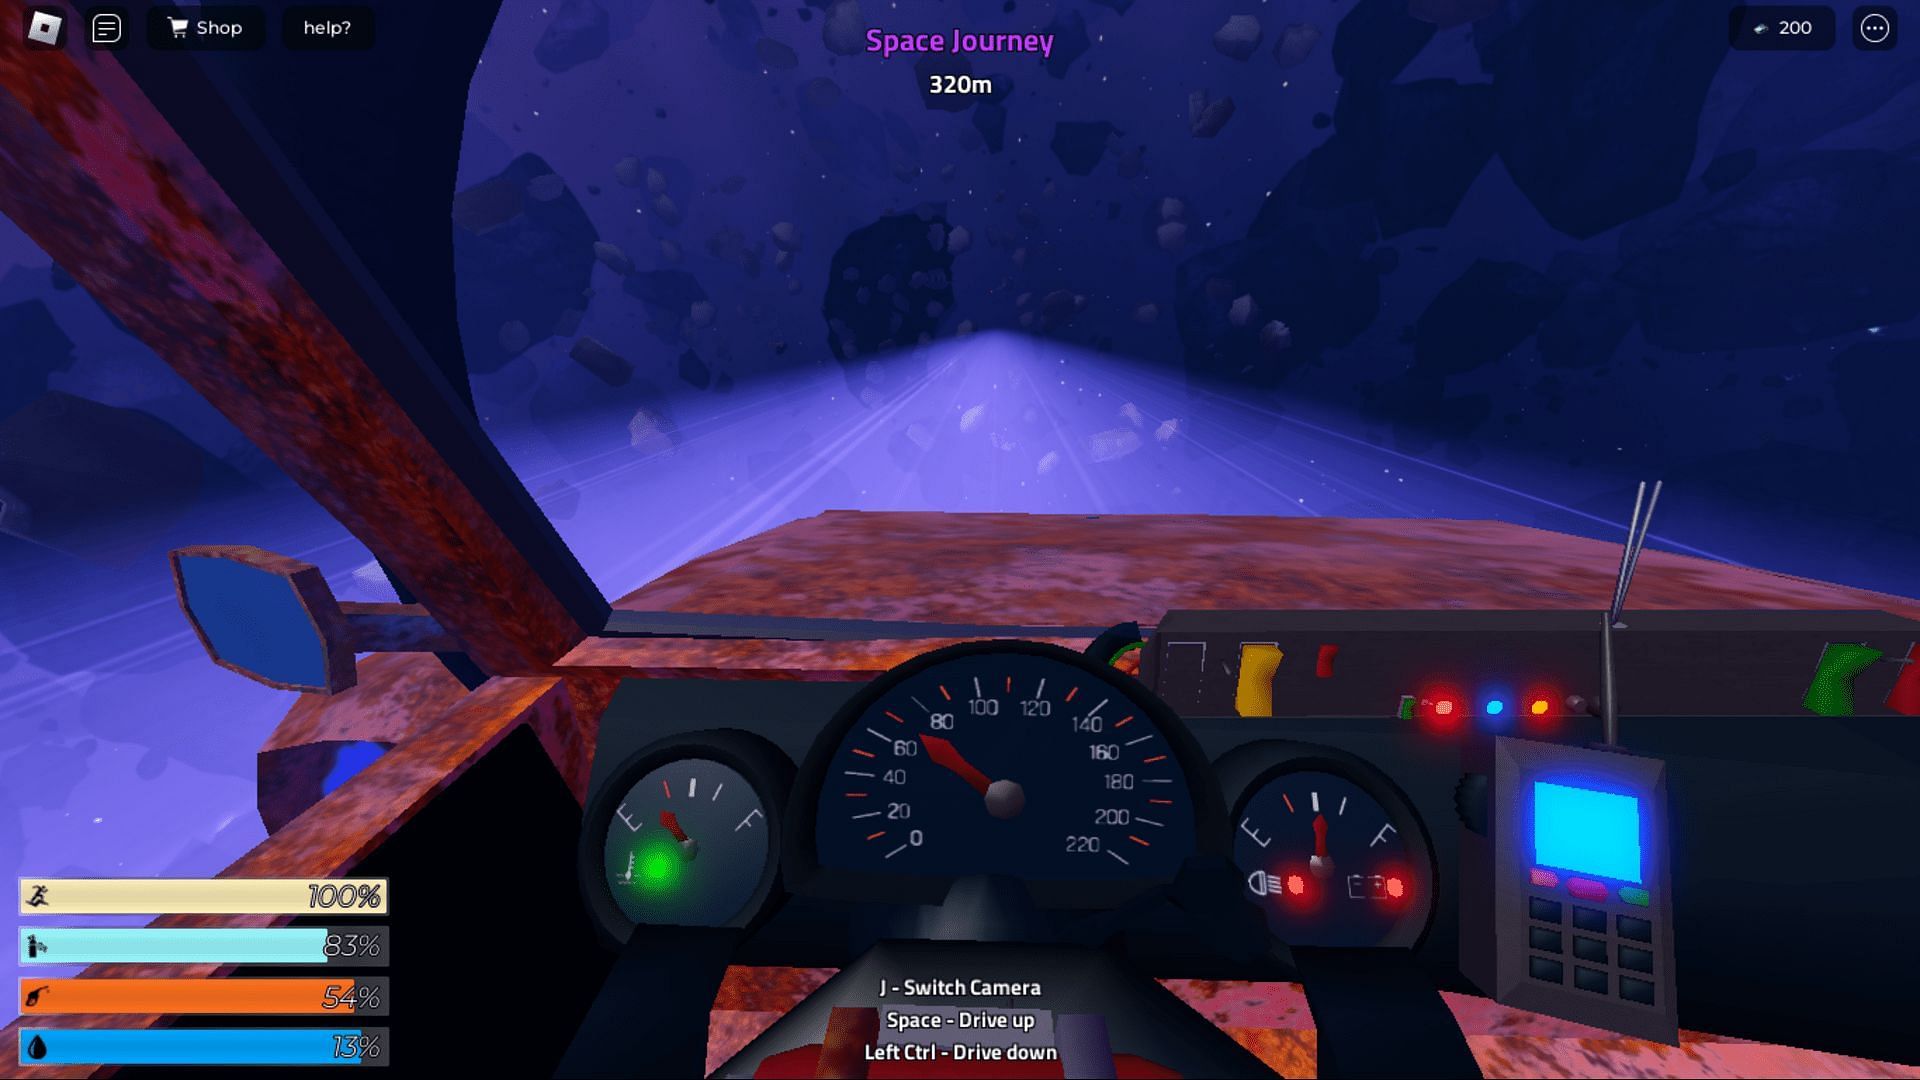 Gameplay screenshot from the game (Image via Roblox)